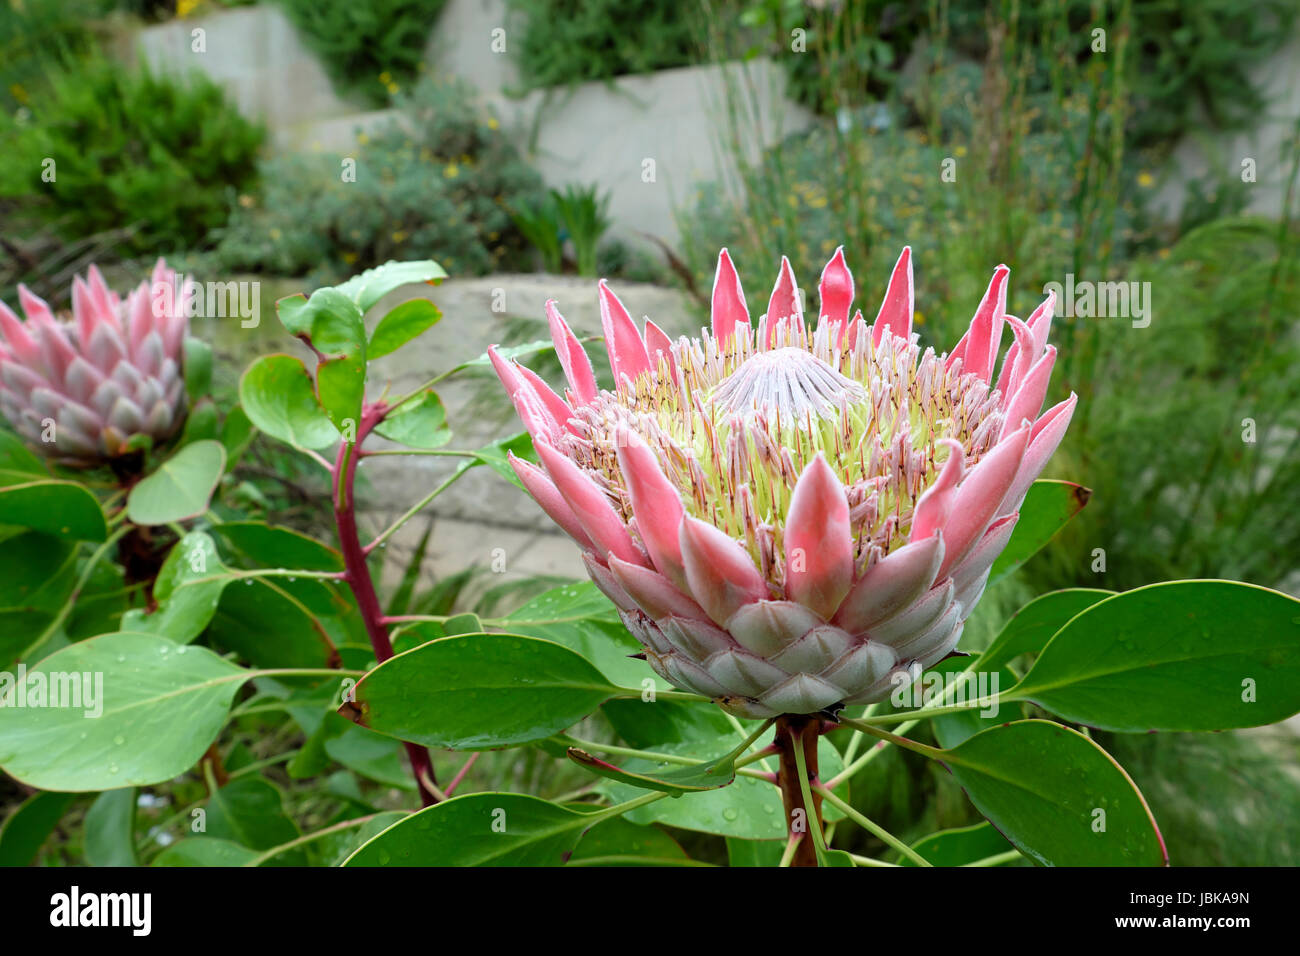 King Protea Cynaroides flowerhead in bloom in the Australian area of the National Botanic Garden of Wales, Carmarthenshire UK   KATHY DEWITT Stock Photo